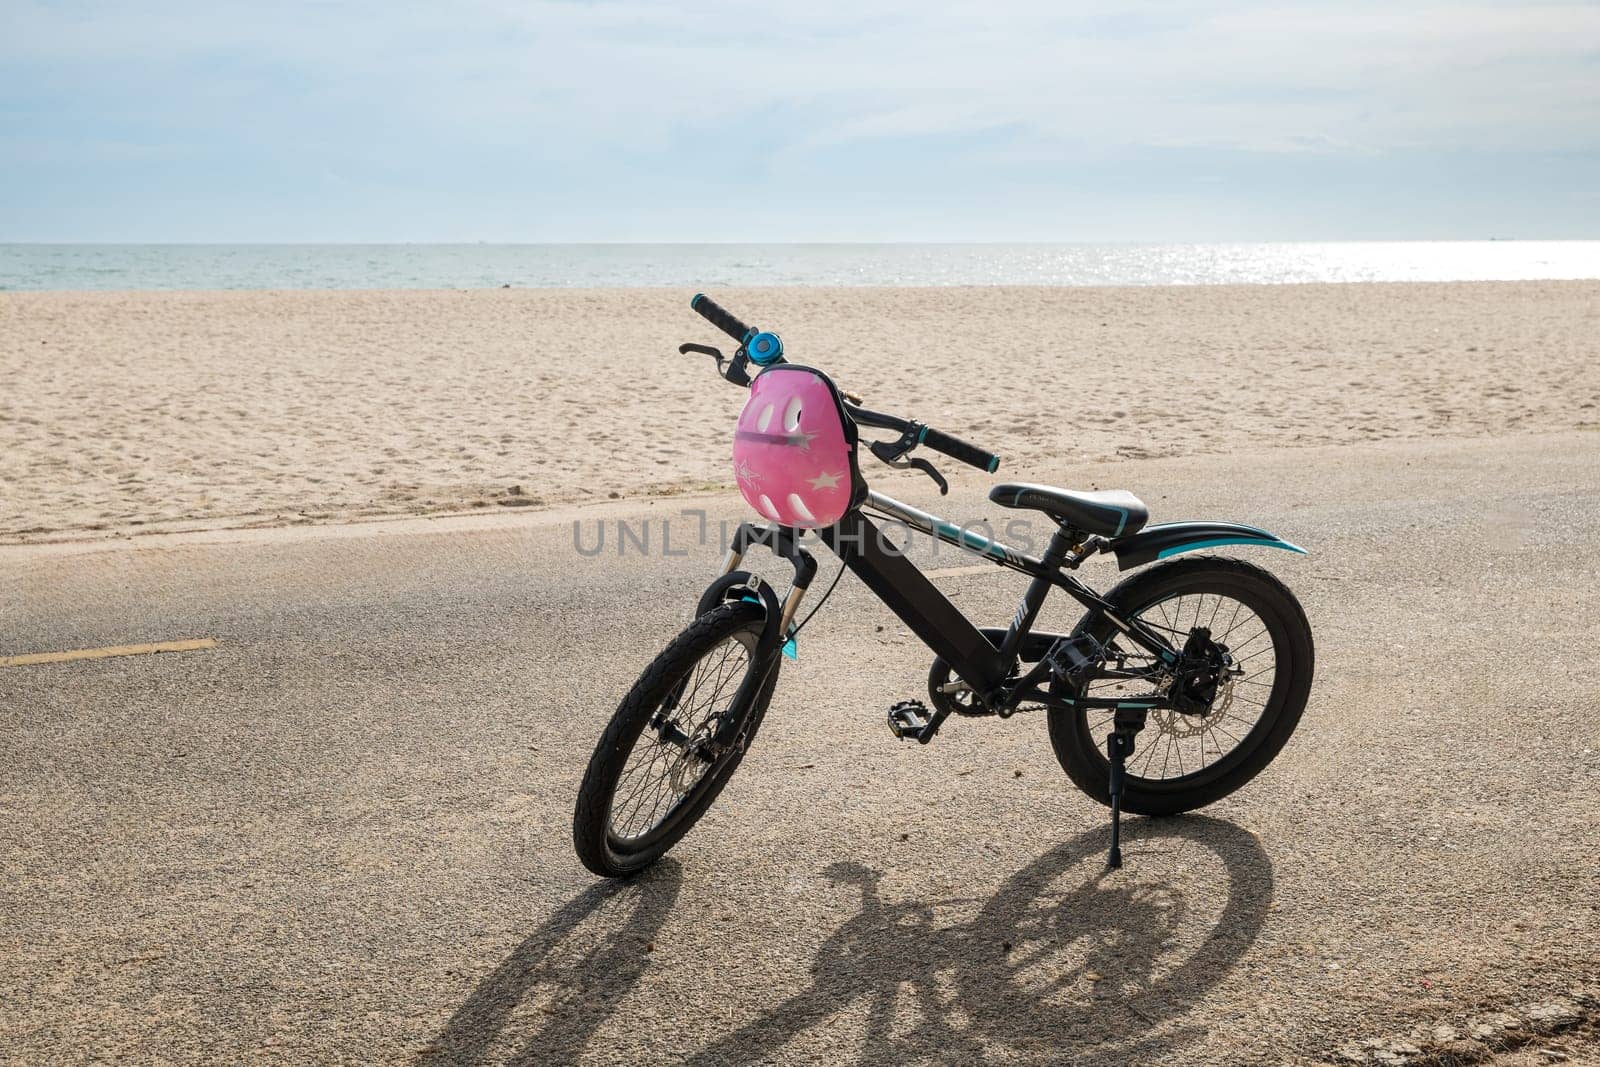 Biking on the beach, A child's bicycle a symbol of freedom and fun rests on the sandy shore under a clear sky creating a serene seascape for a delightful tourism experience. by Sorapop